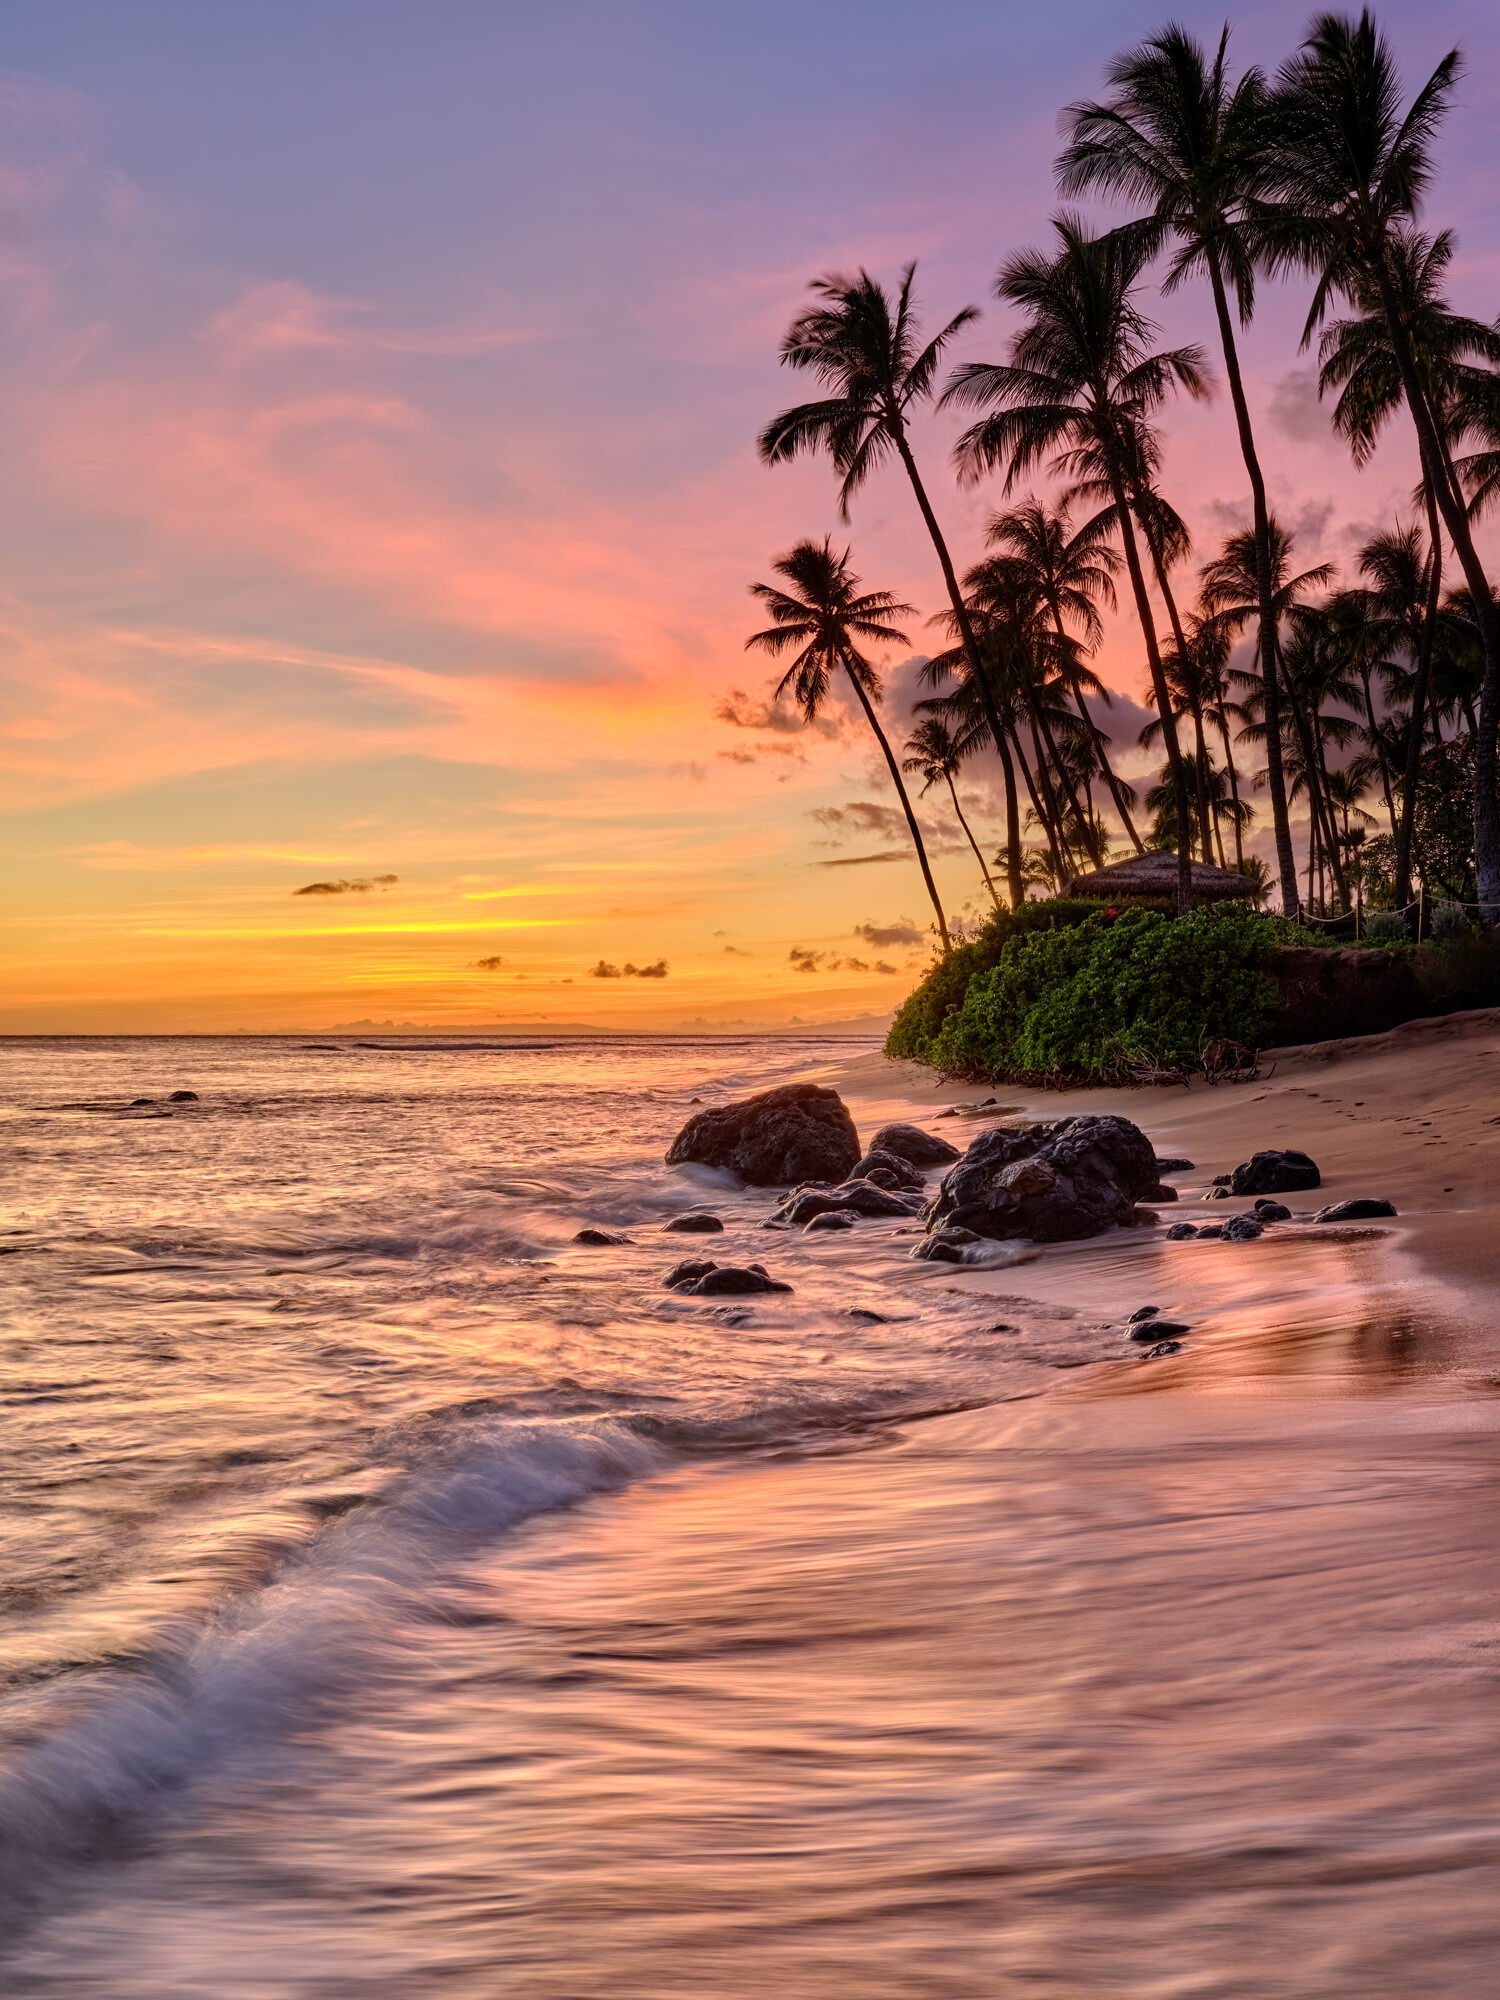 It just doesn't get much better than a beautiful relaxing sunset at Kaanapali Beach on Maui.  I took about 5-6 good waves at...